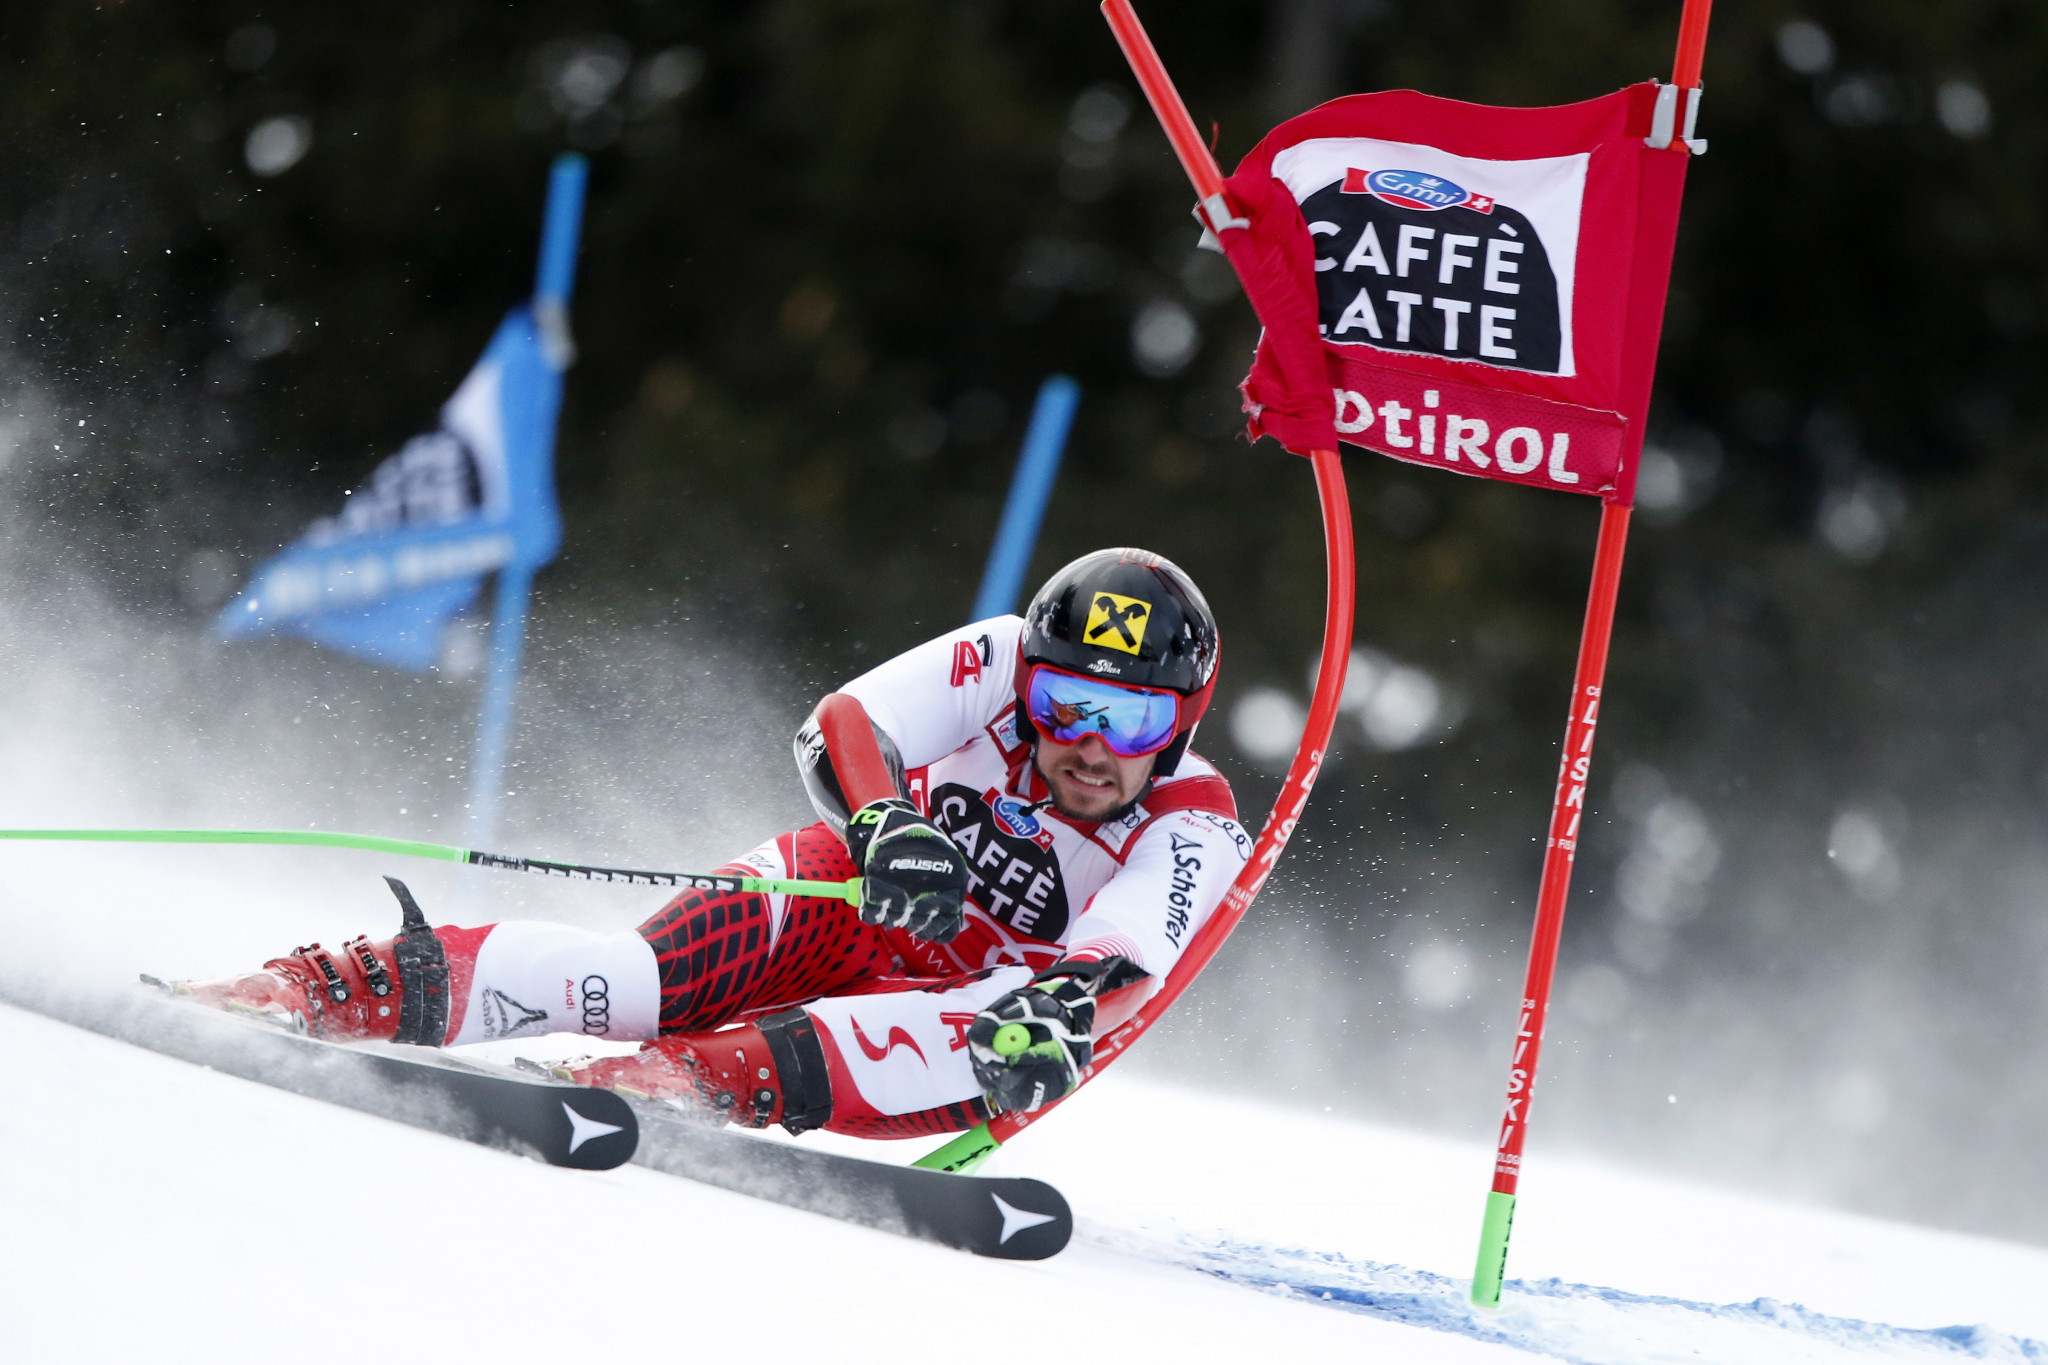 Hirscher sails to sixth World Cup giant slalom in Alta Badia, reports on Gisin after crash are encouraging